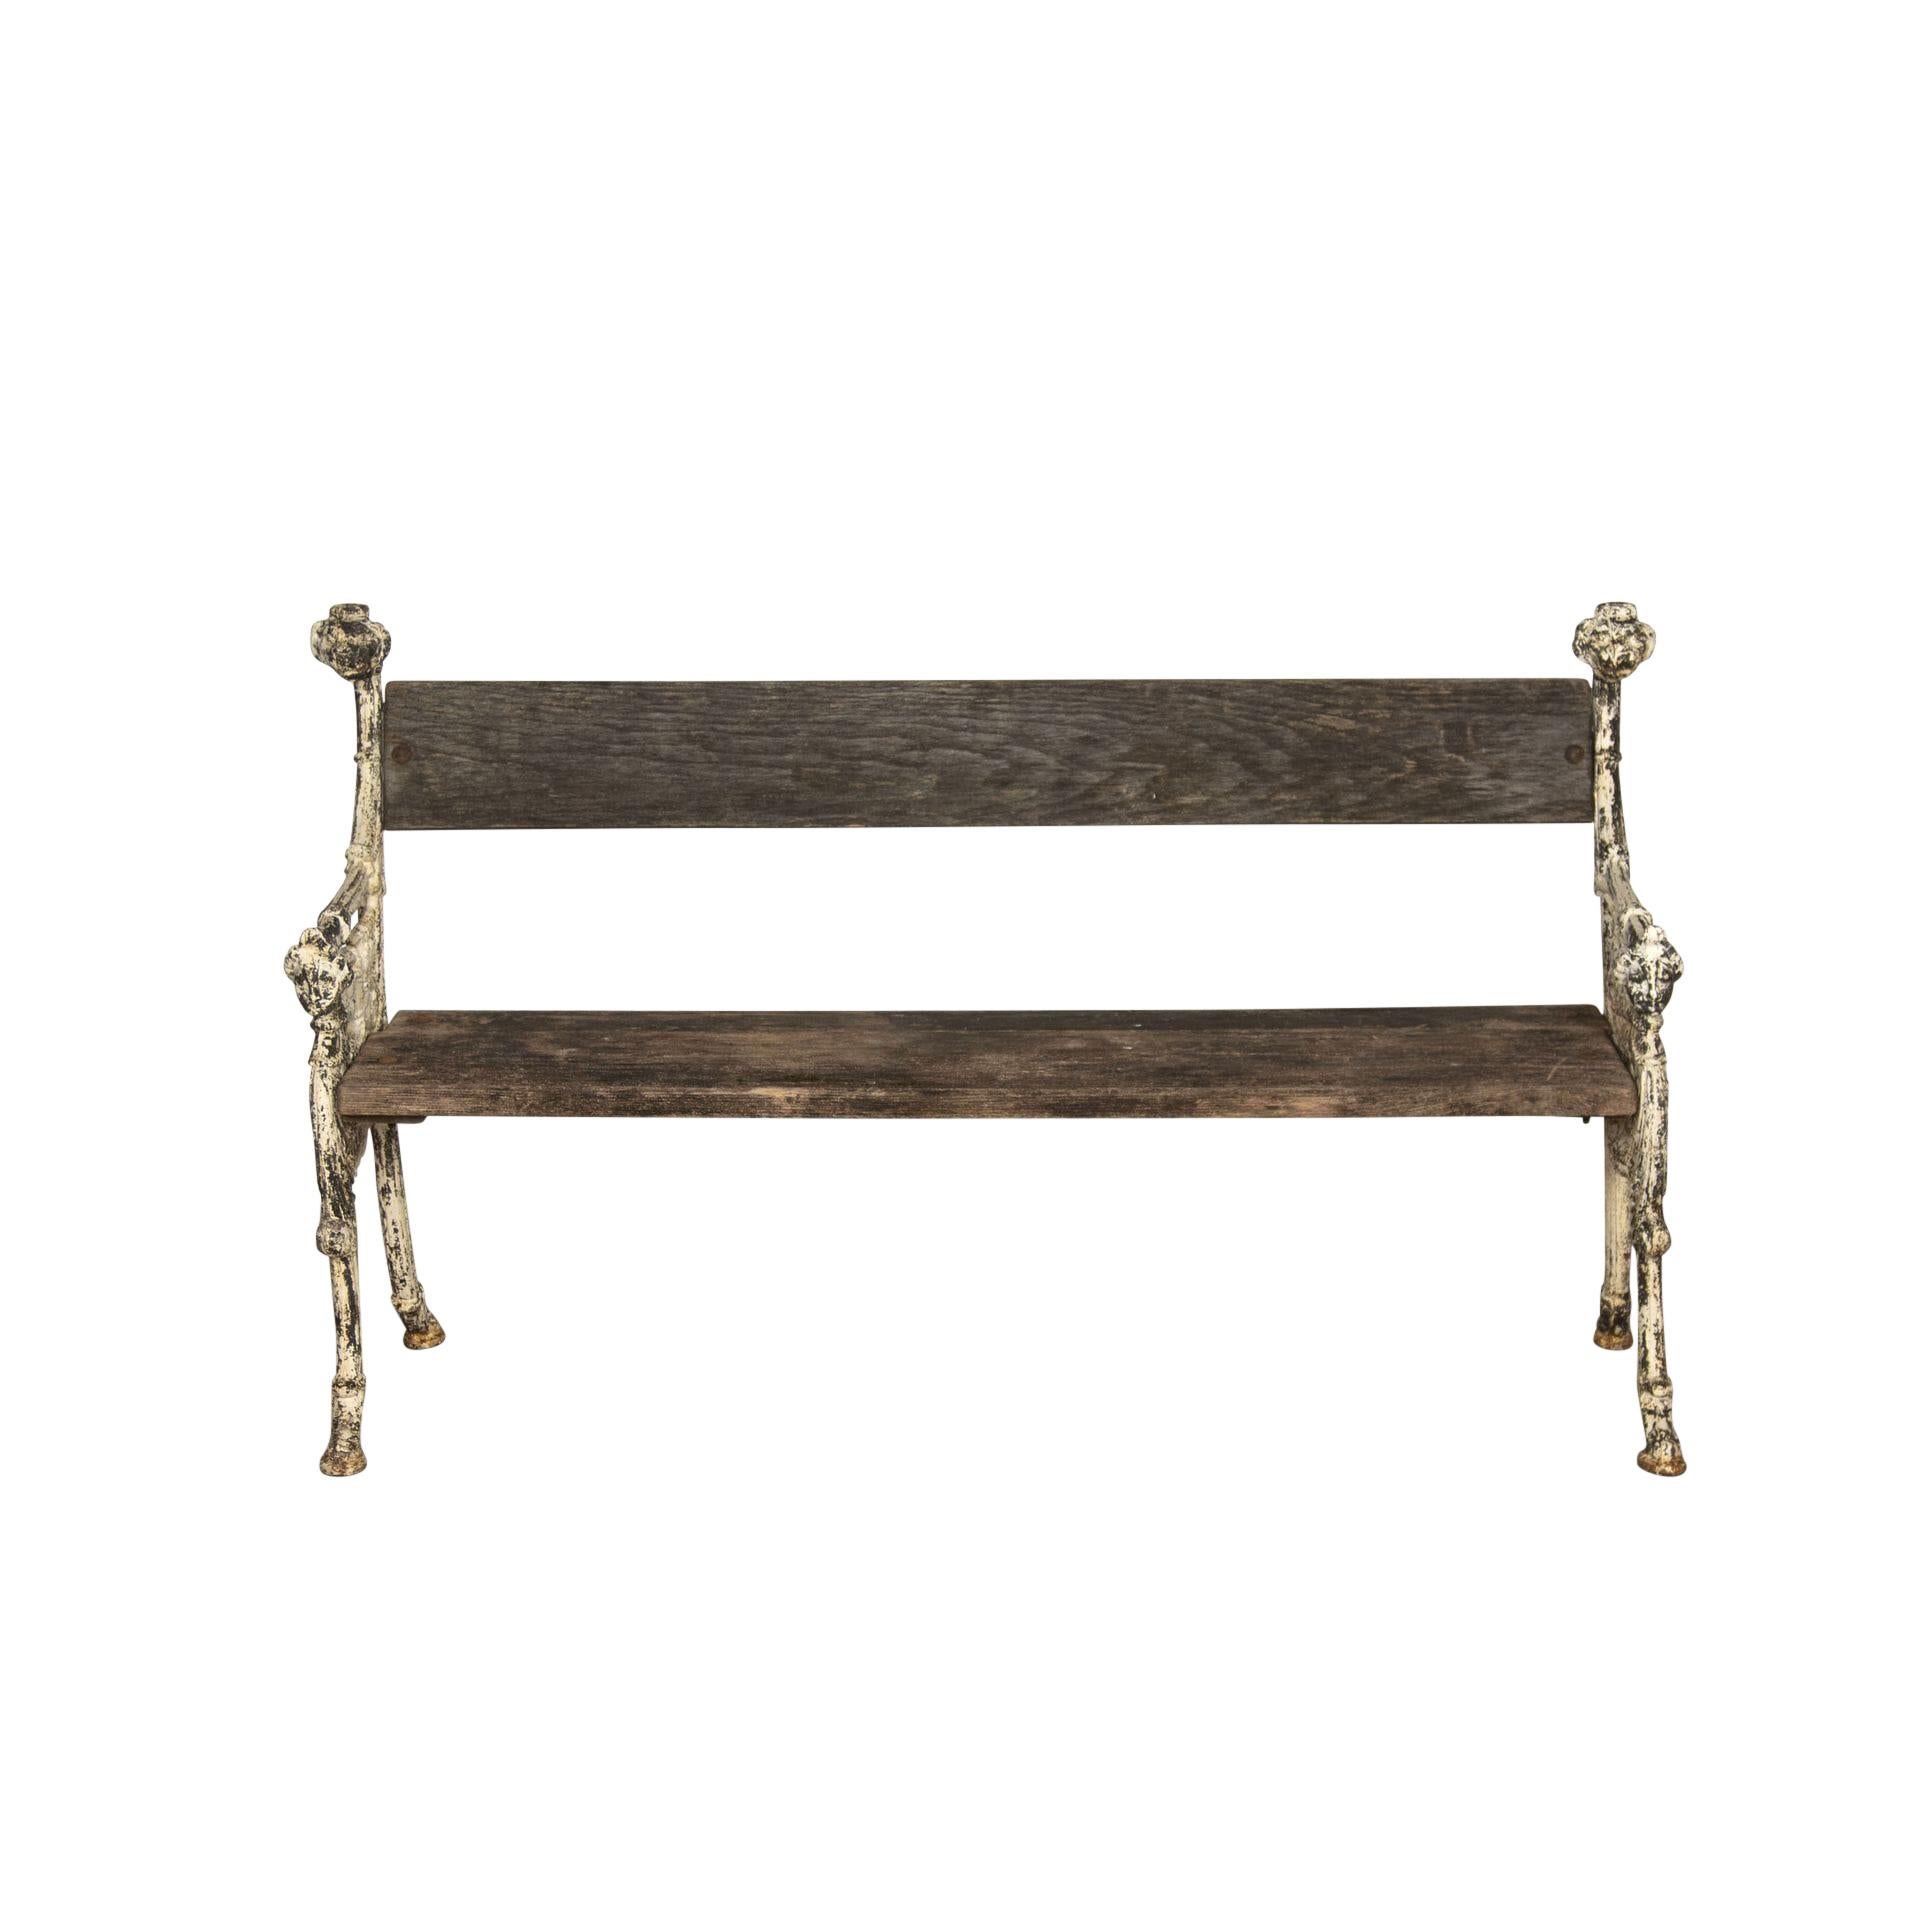 19th century exceptional quality garden bench with original patina.